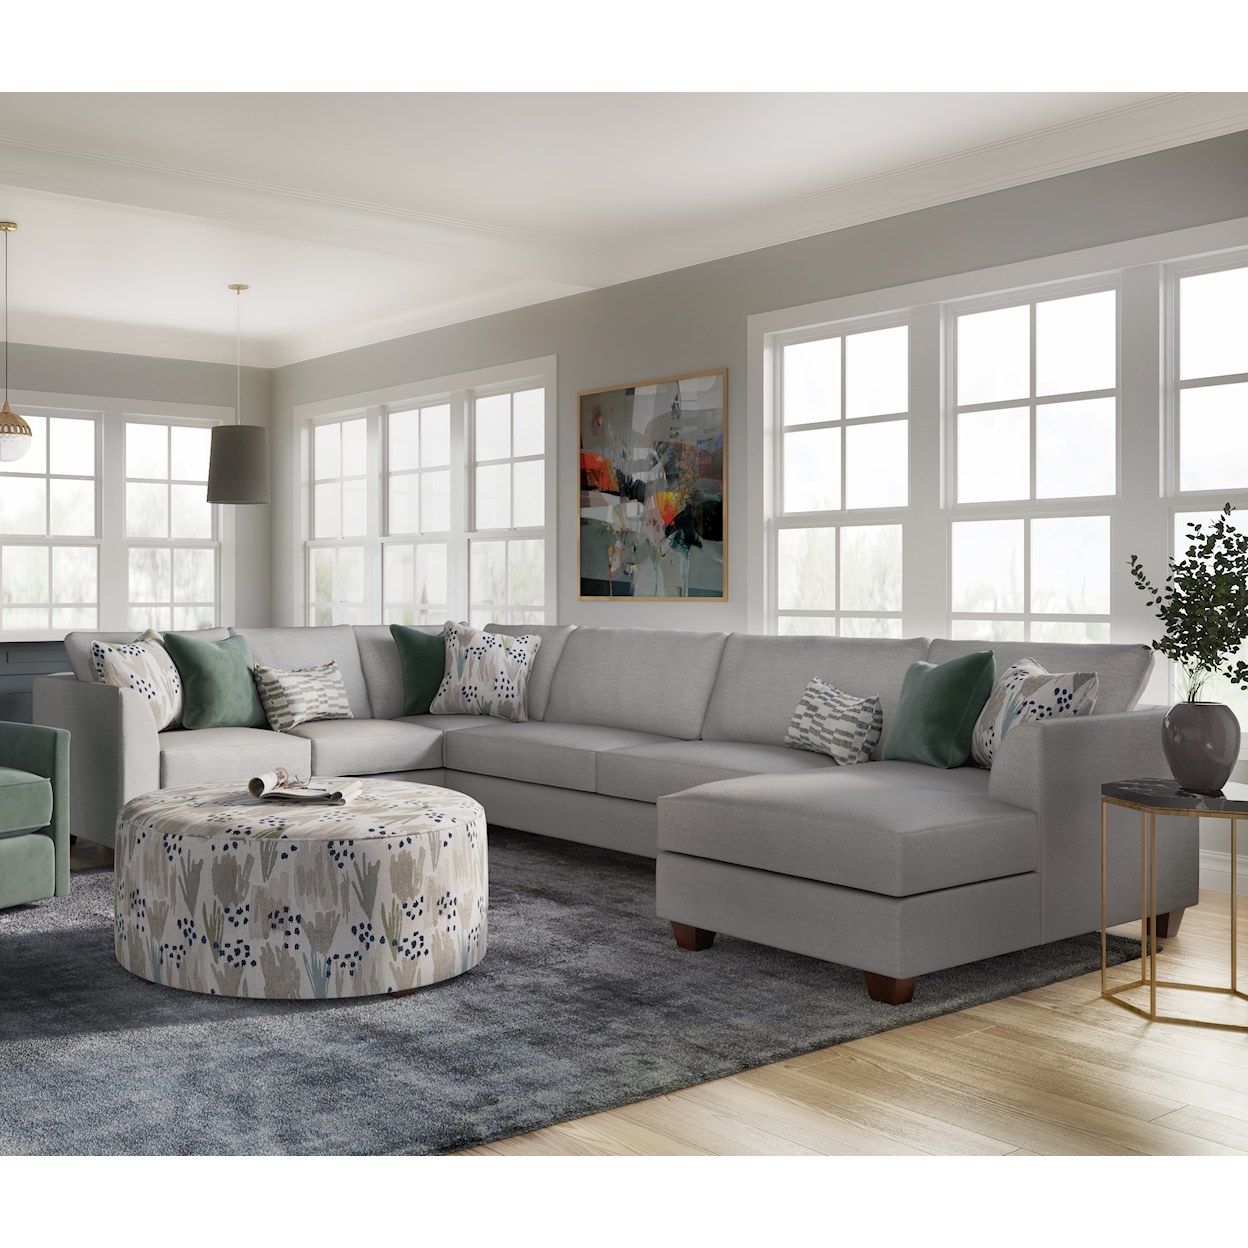 VFM Signature 28 WENDY LINEN Sectional with Chaise